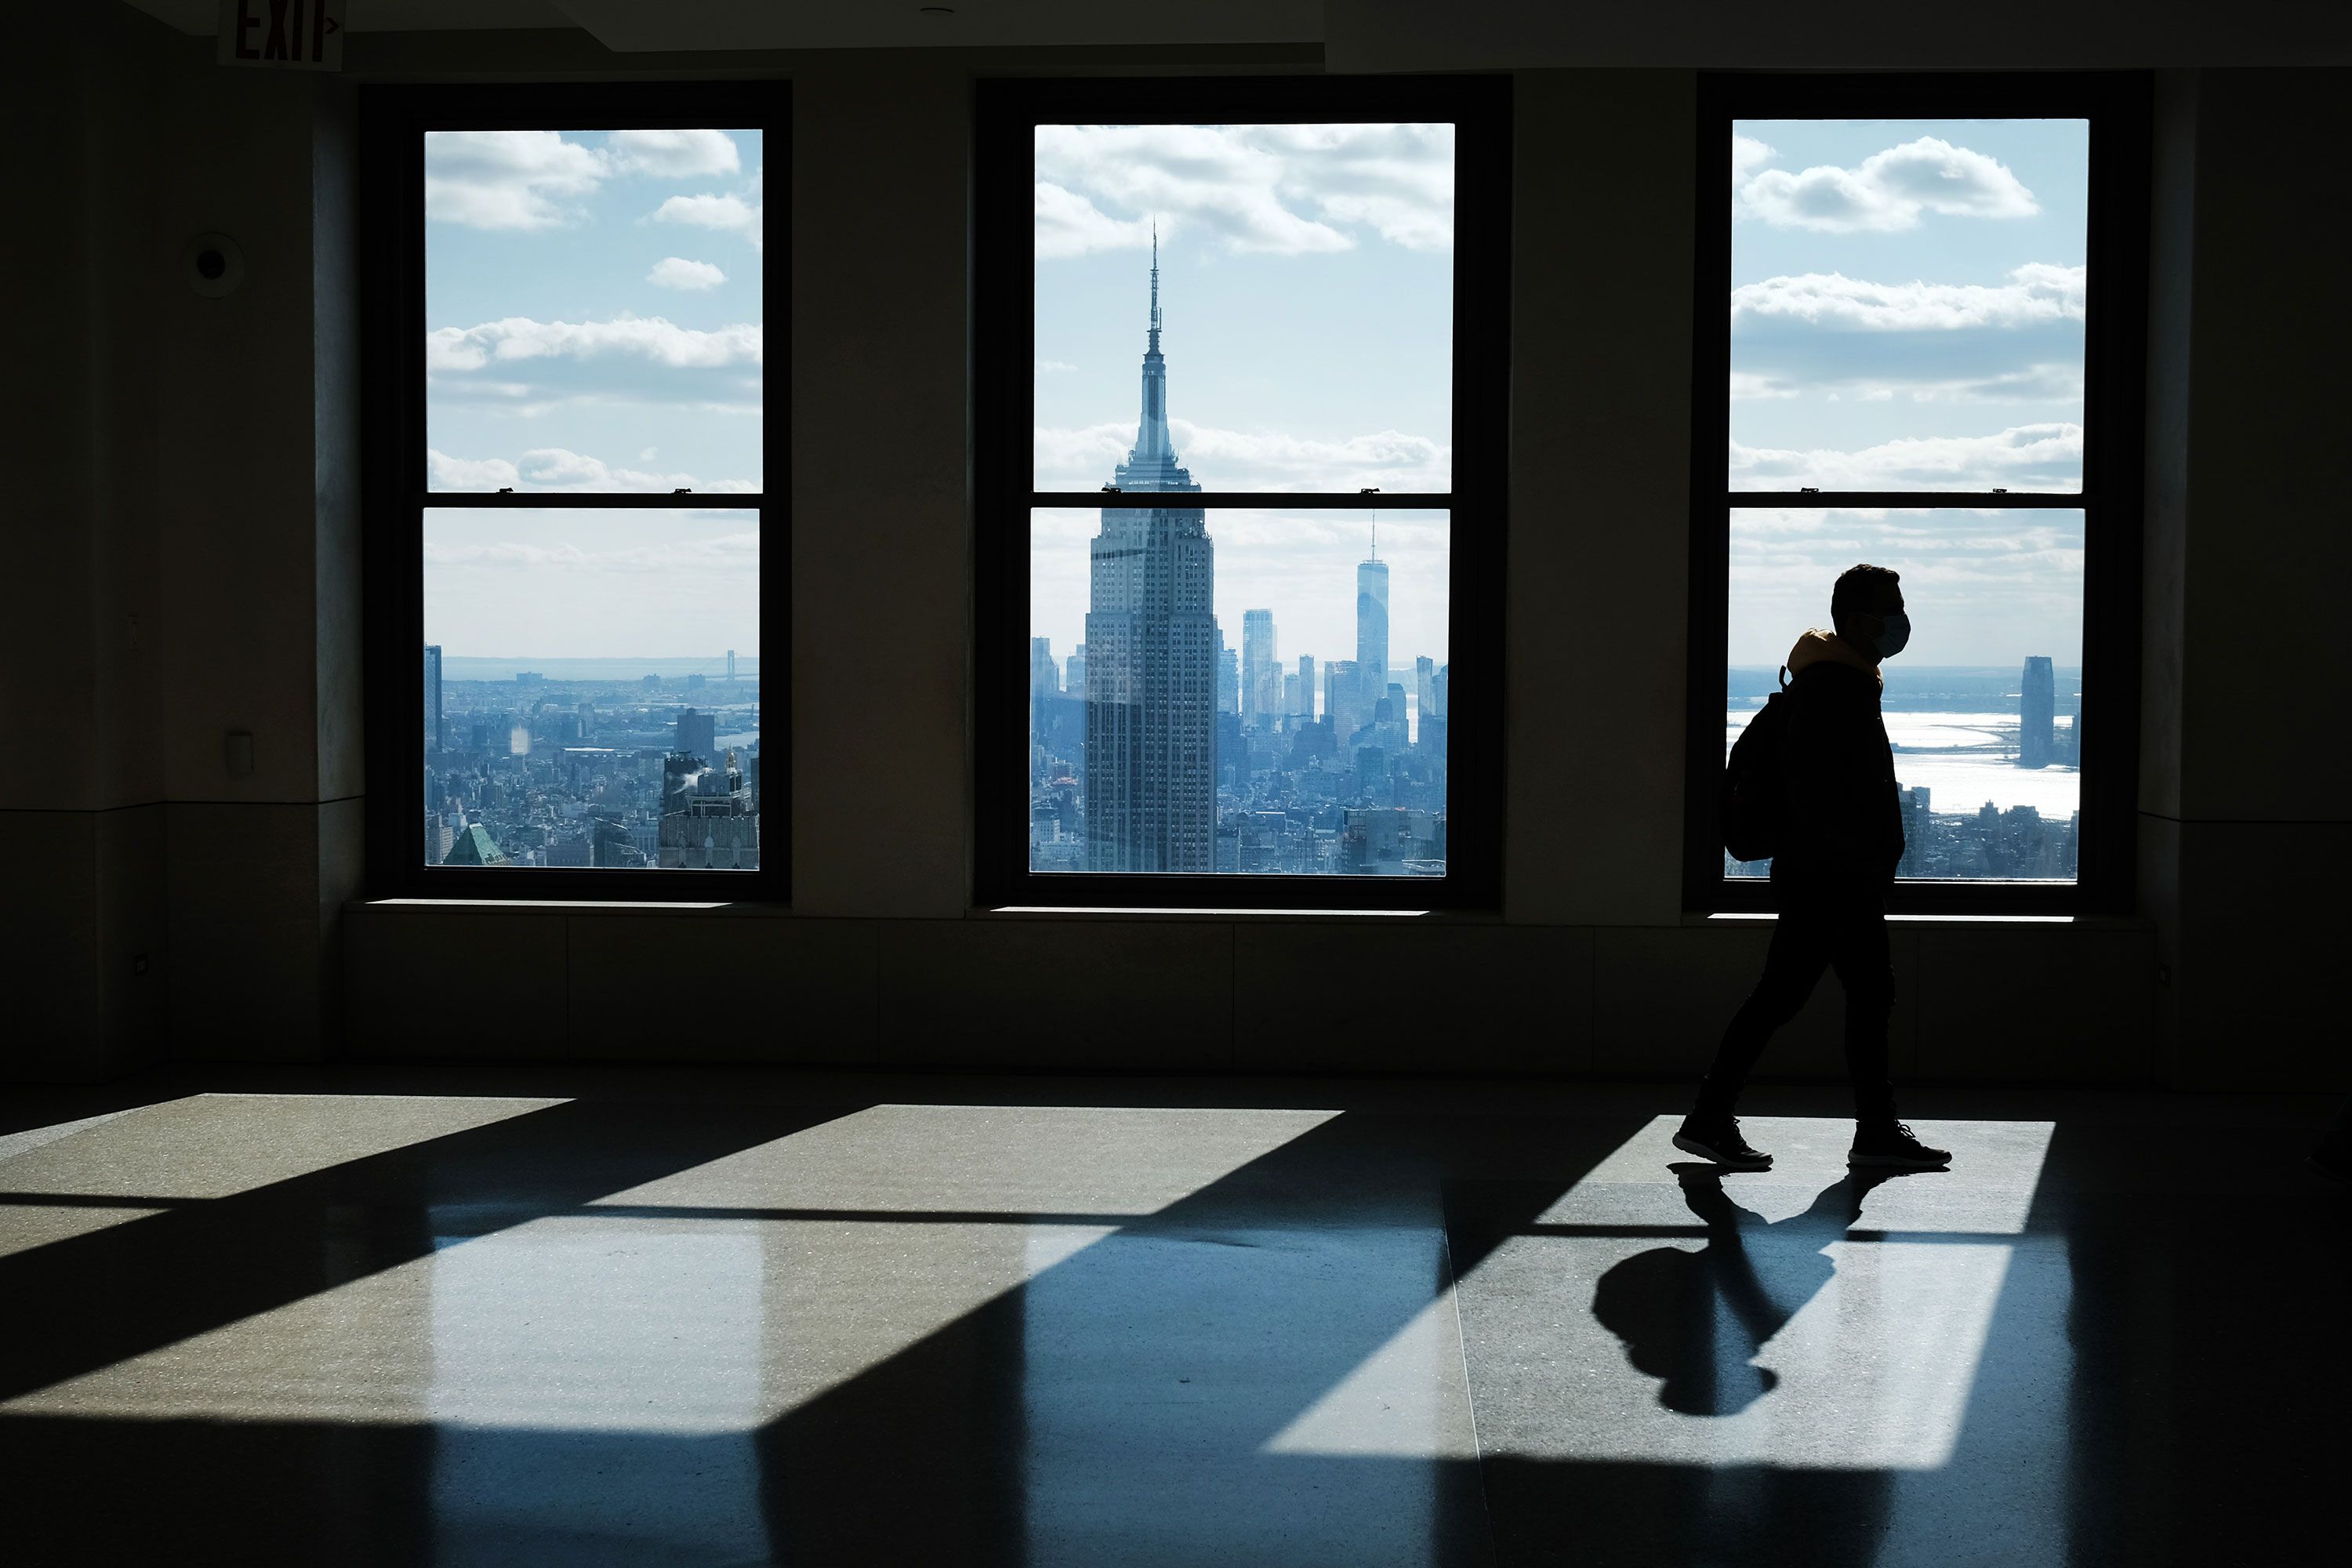 Remote Work Costs NYC $12 Billion a Year By Killing Big Offices